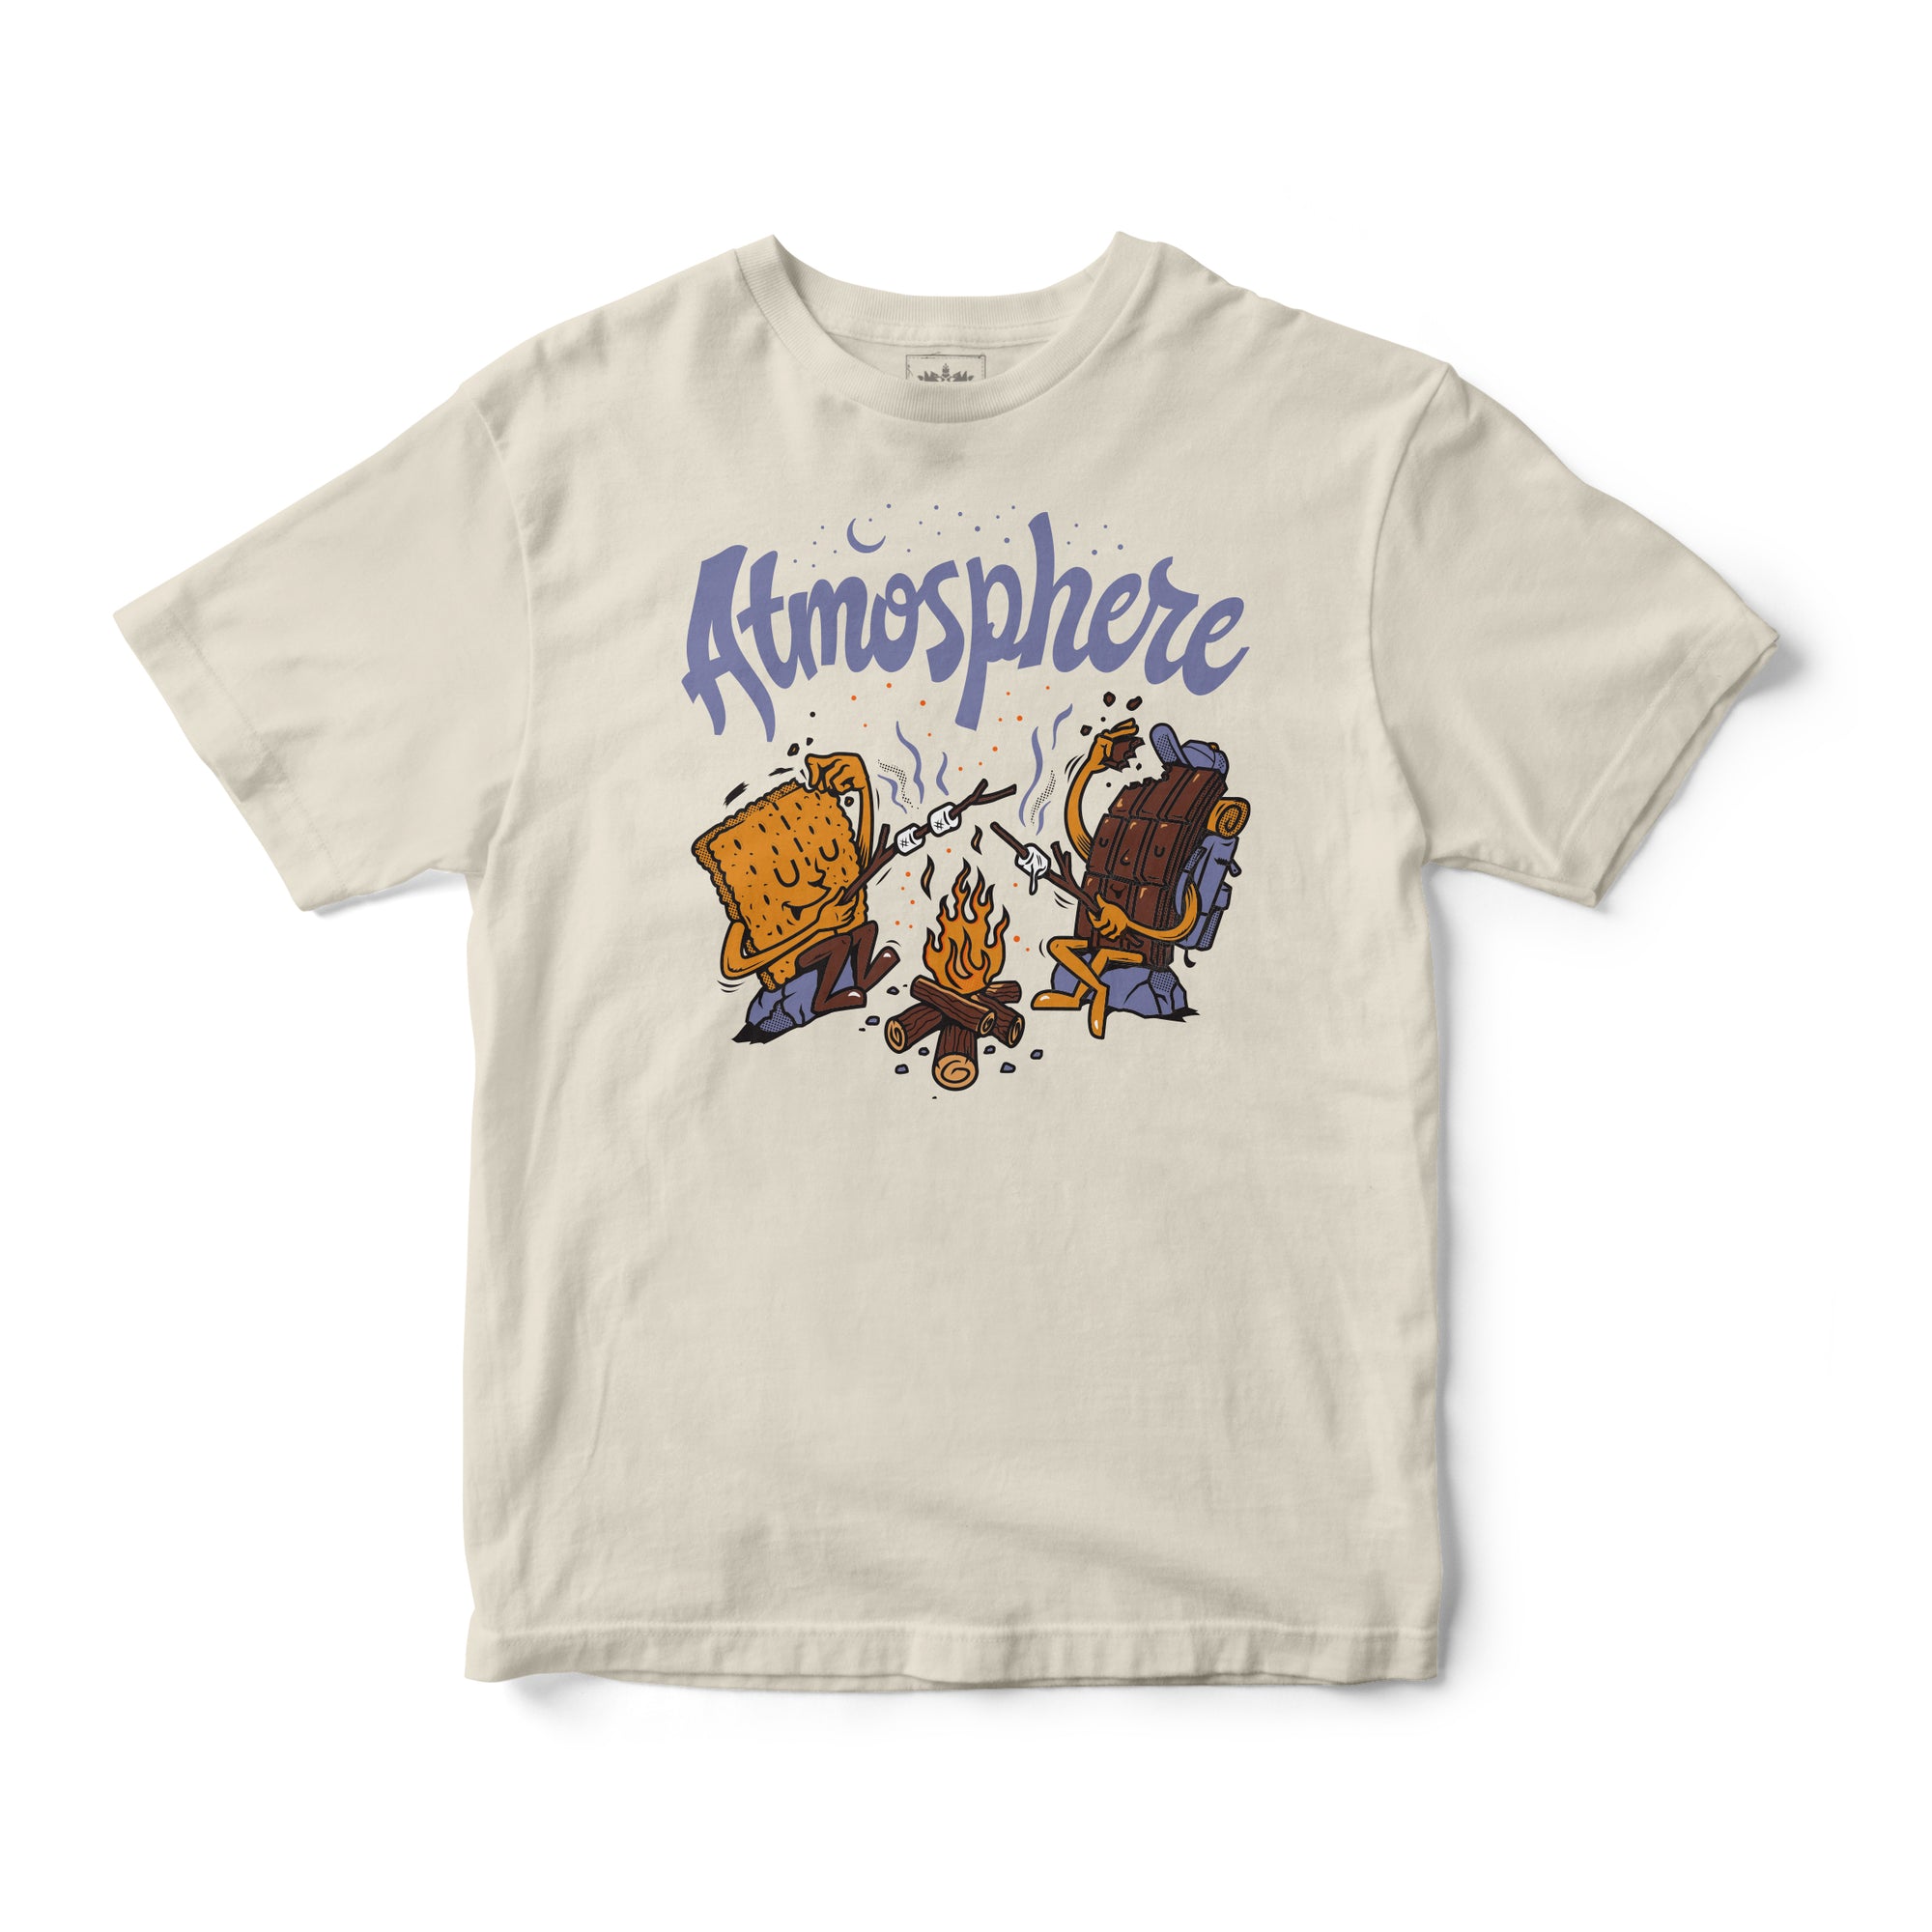 Atmosphere - Campfire Youth Shirt